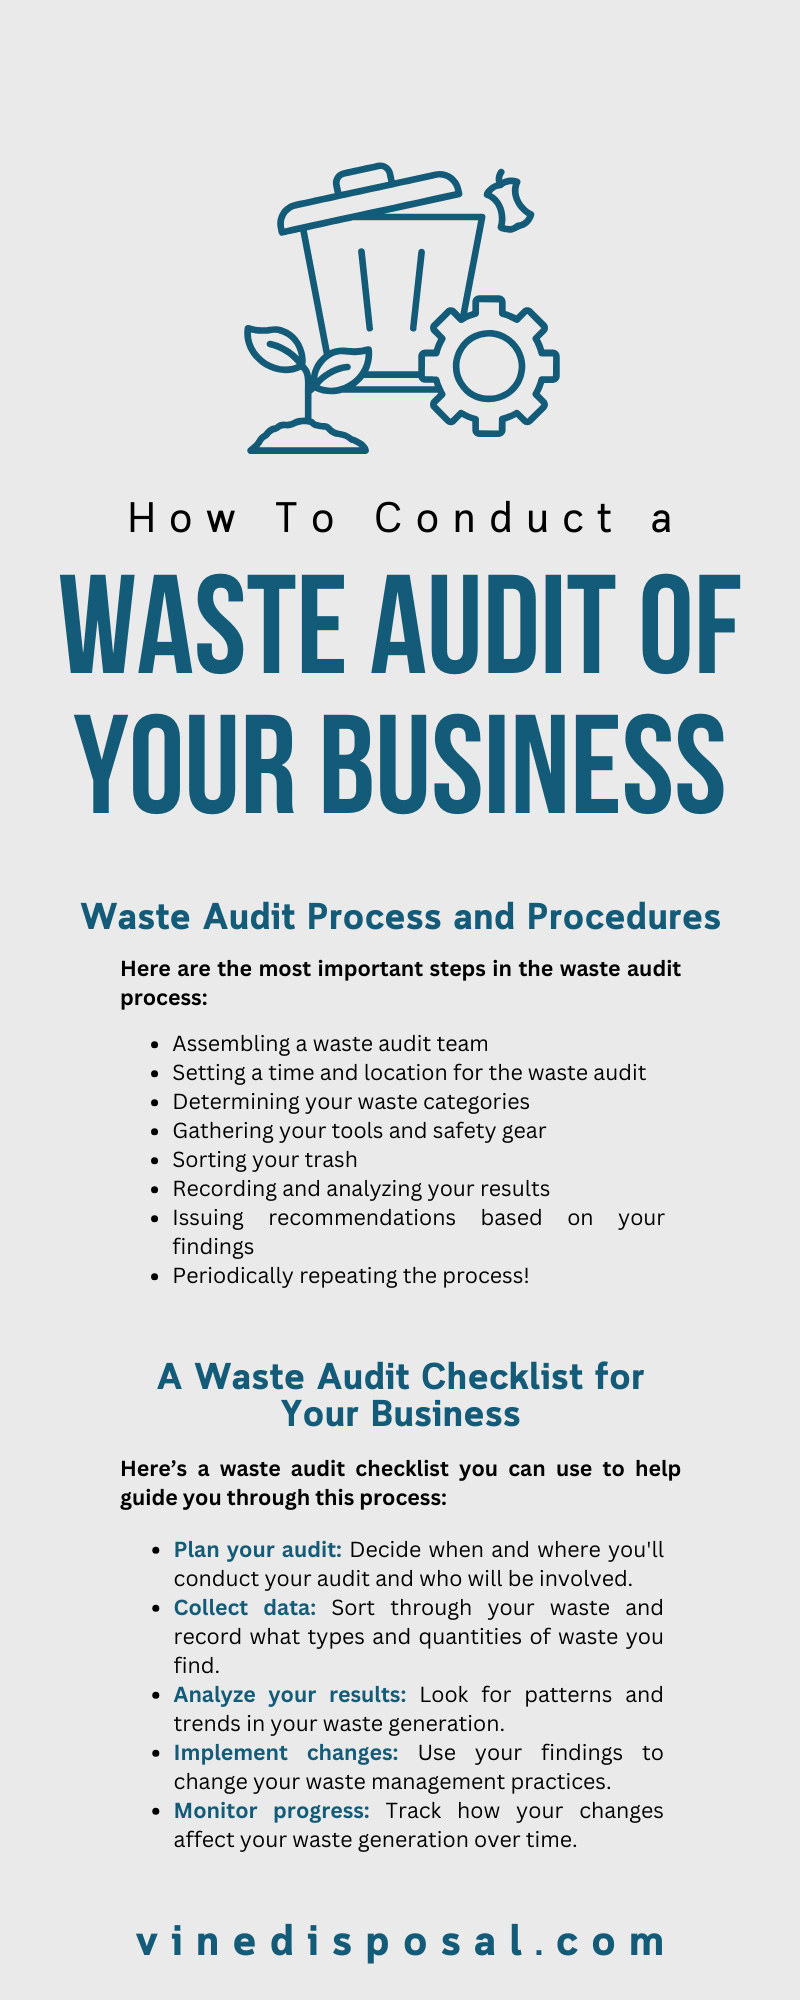 How To Conduct a Waste Audit of Your Business